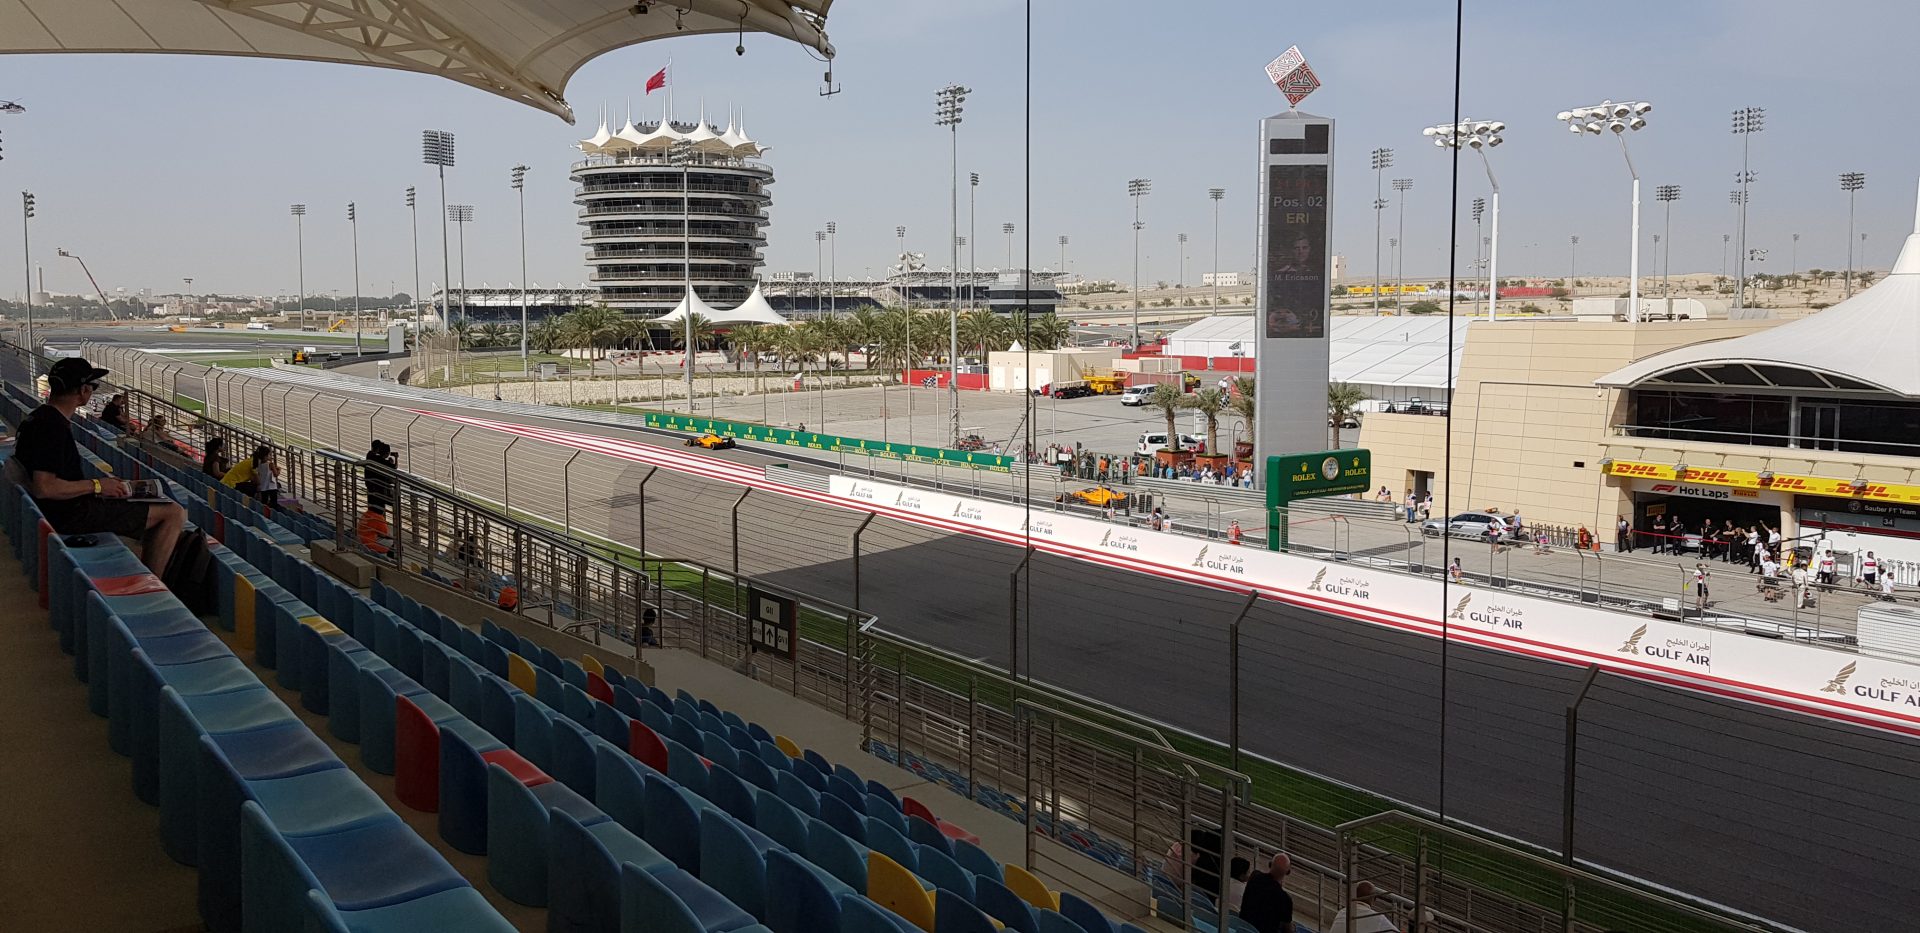 The iconic tower at the Formula 1 Grand Prix of Bahrain